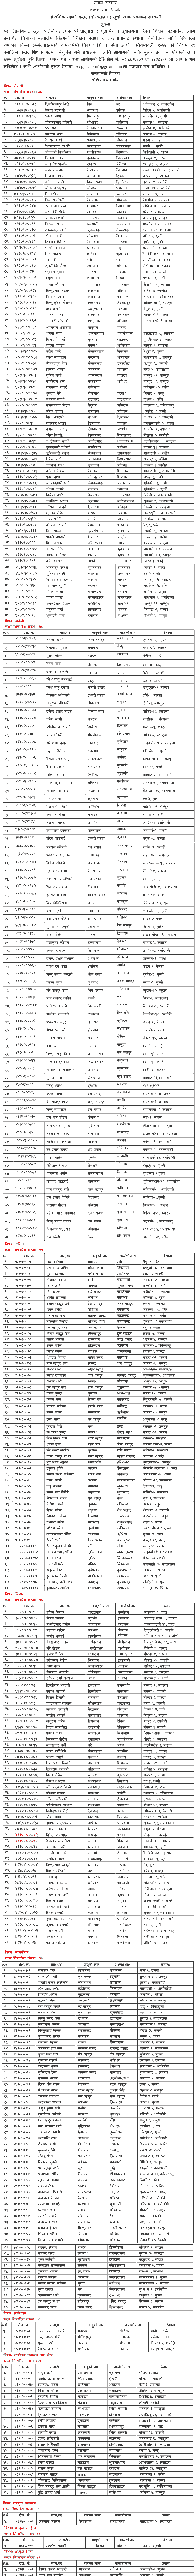 Secondary Level Western Region Eligible Candidates name list for Contract